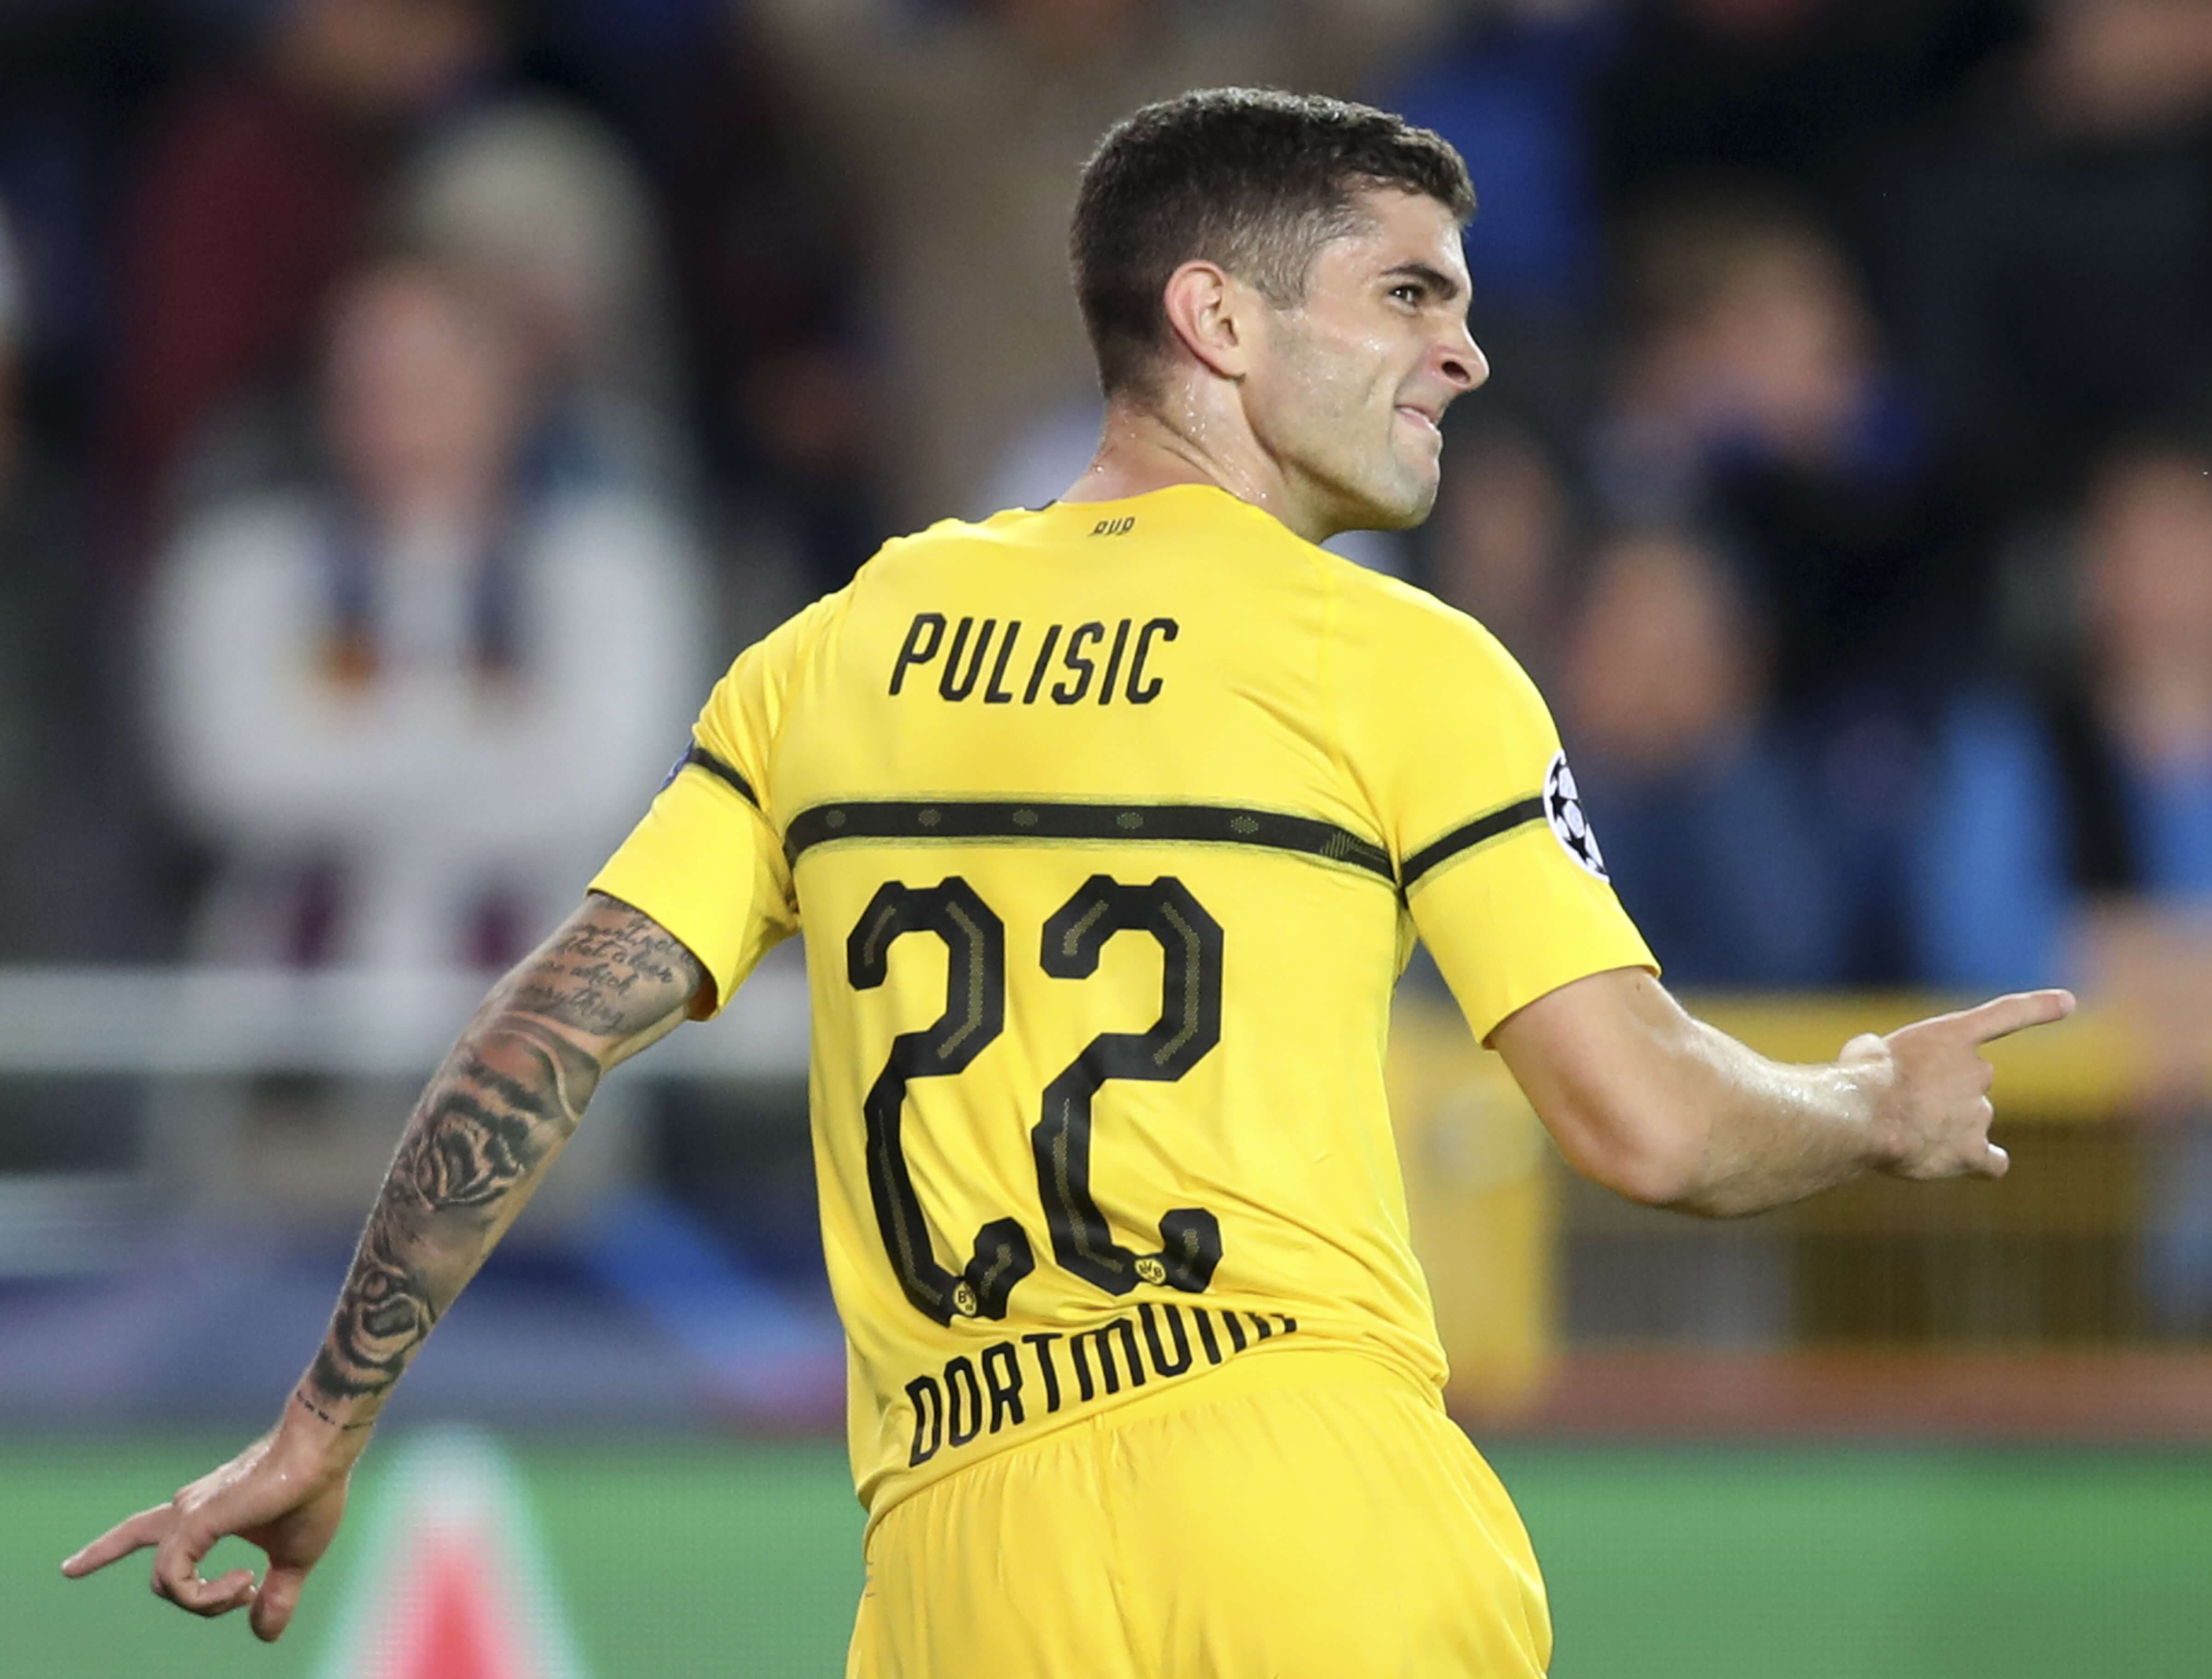 Borussia Dortmund's Christian Pulisic celebrates scoring his side's first goal during a Champions League group A soccer match between Club Brugge and Borussia Dortmund at the Jan Breydel Stadium in Bruges, Belgium, on Sept. 18.